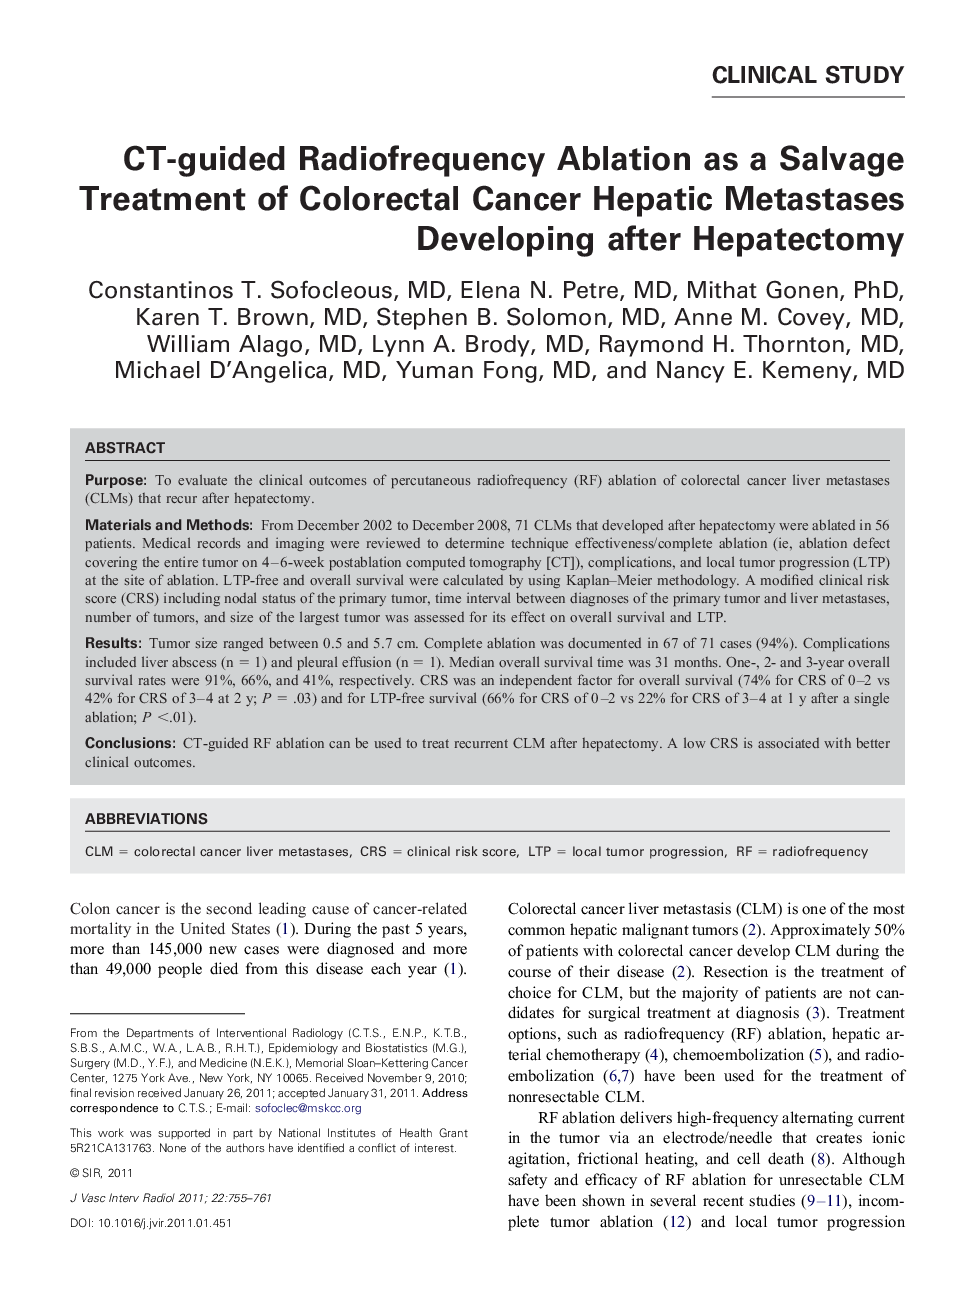 CT-guided Radiofrequency Ablation as a Salvage Treatment of Colorectal Cancer Hepatic Metastases Developing after Hepatectomy